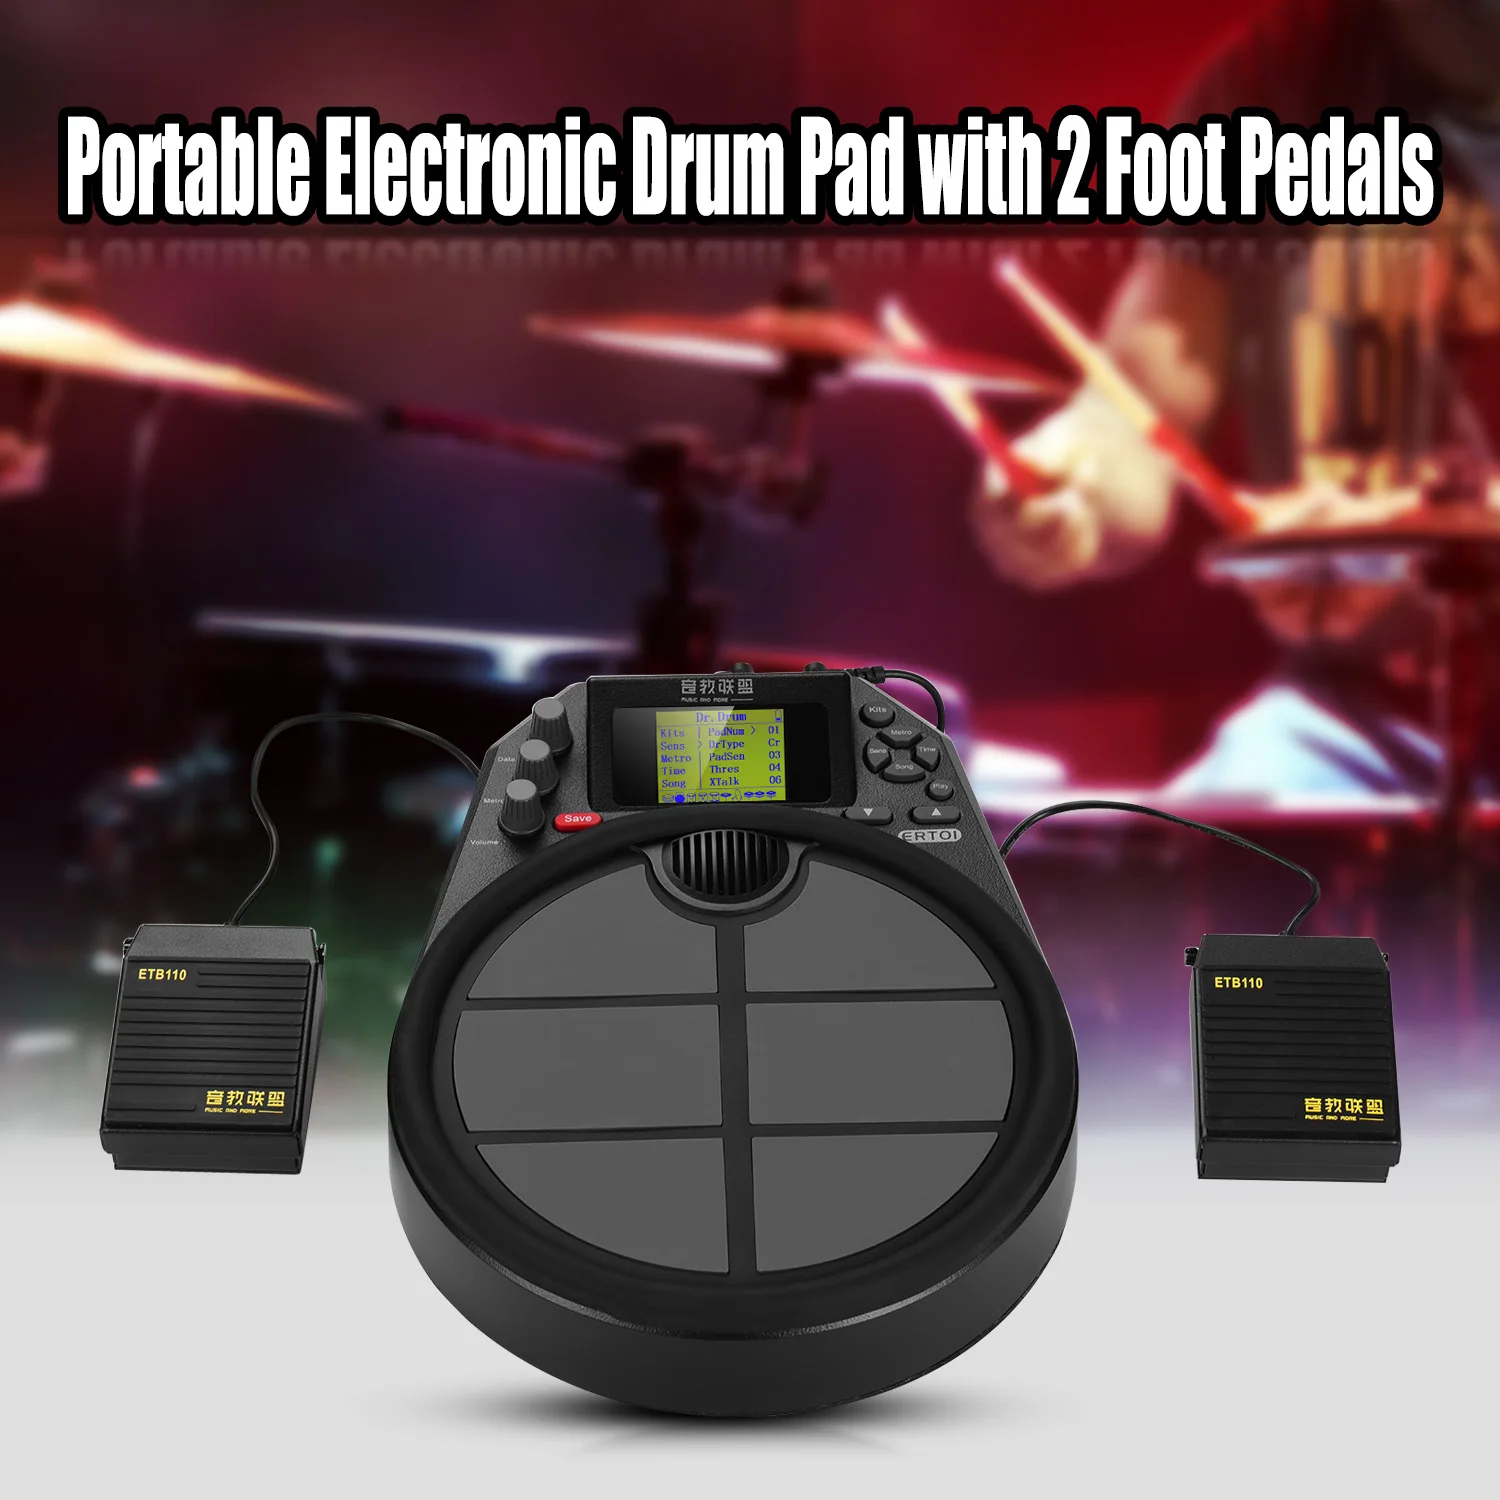 

Portable Electronic Drum Percussion Drum Practice Pad 15 Drum Kit Sounds 59 Demo Metronome Timer Function LCD Display